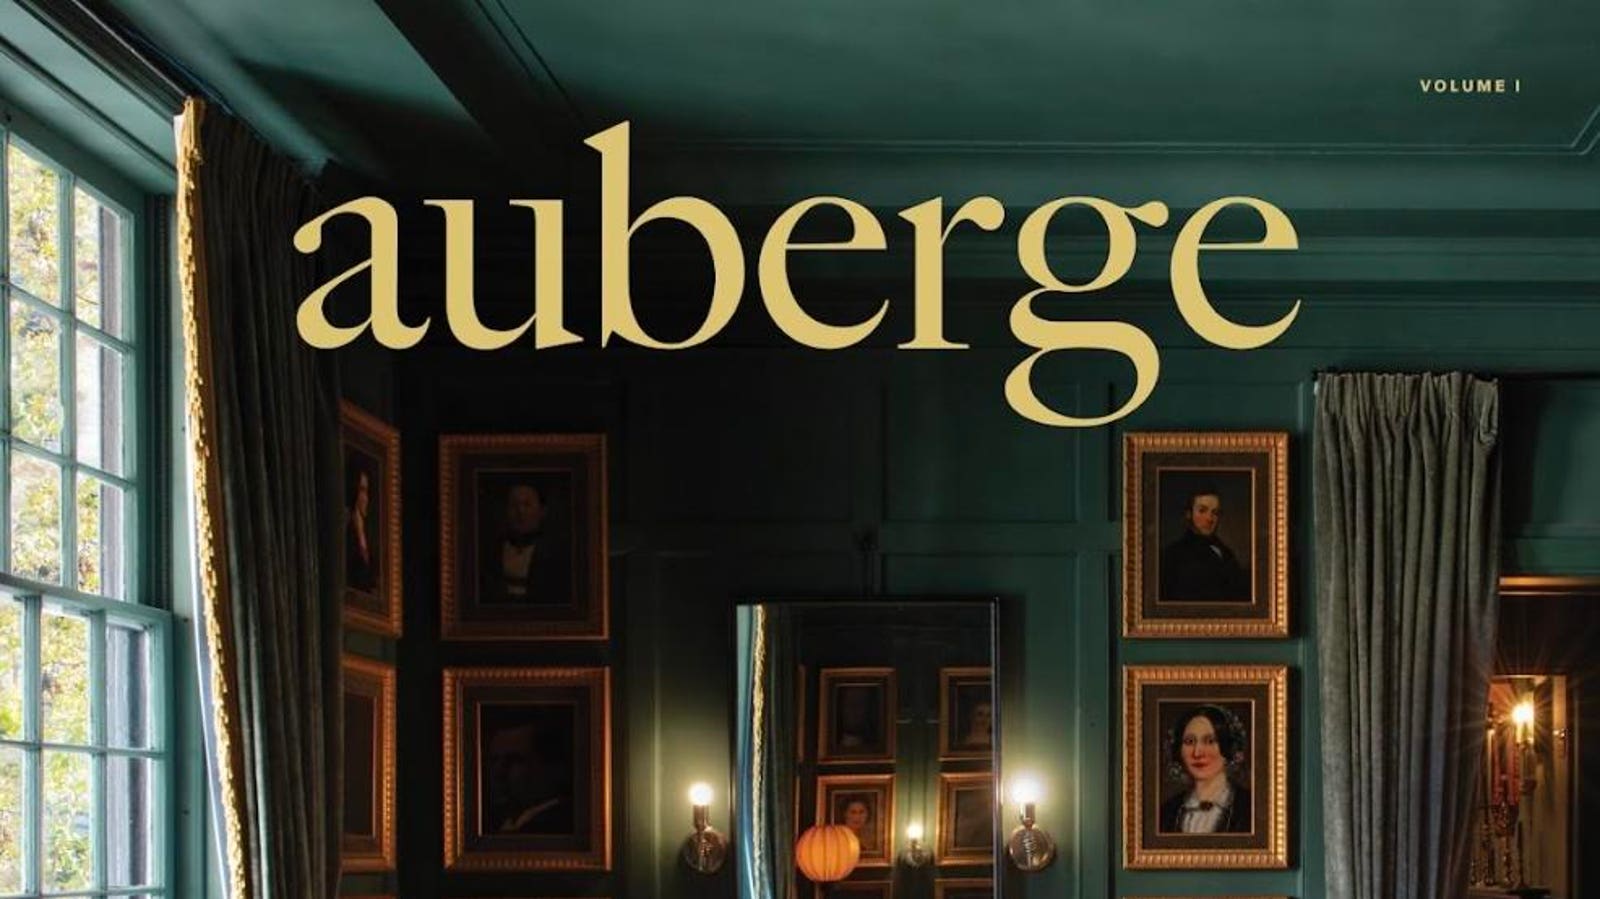 Auberge Unveils Print Journal And Media Channel With NMG Network